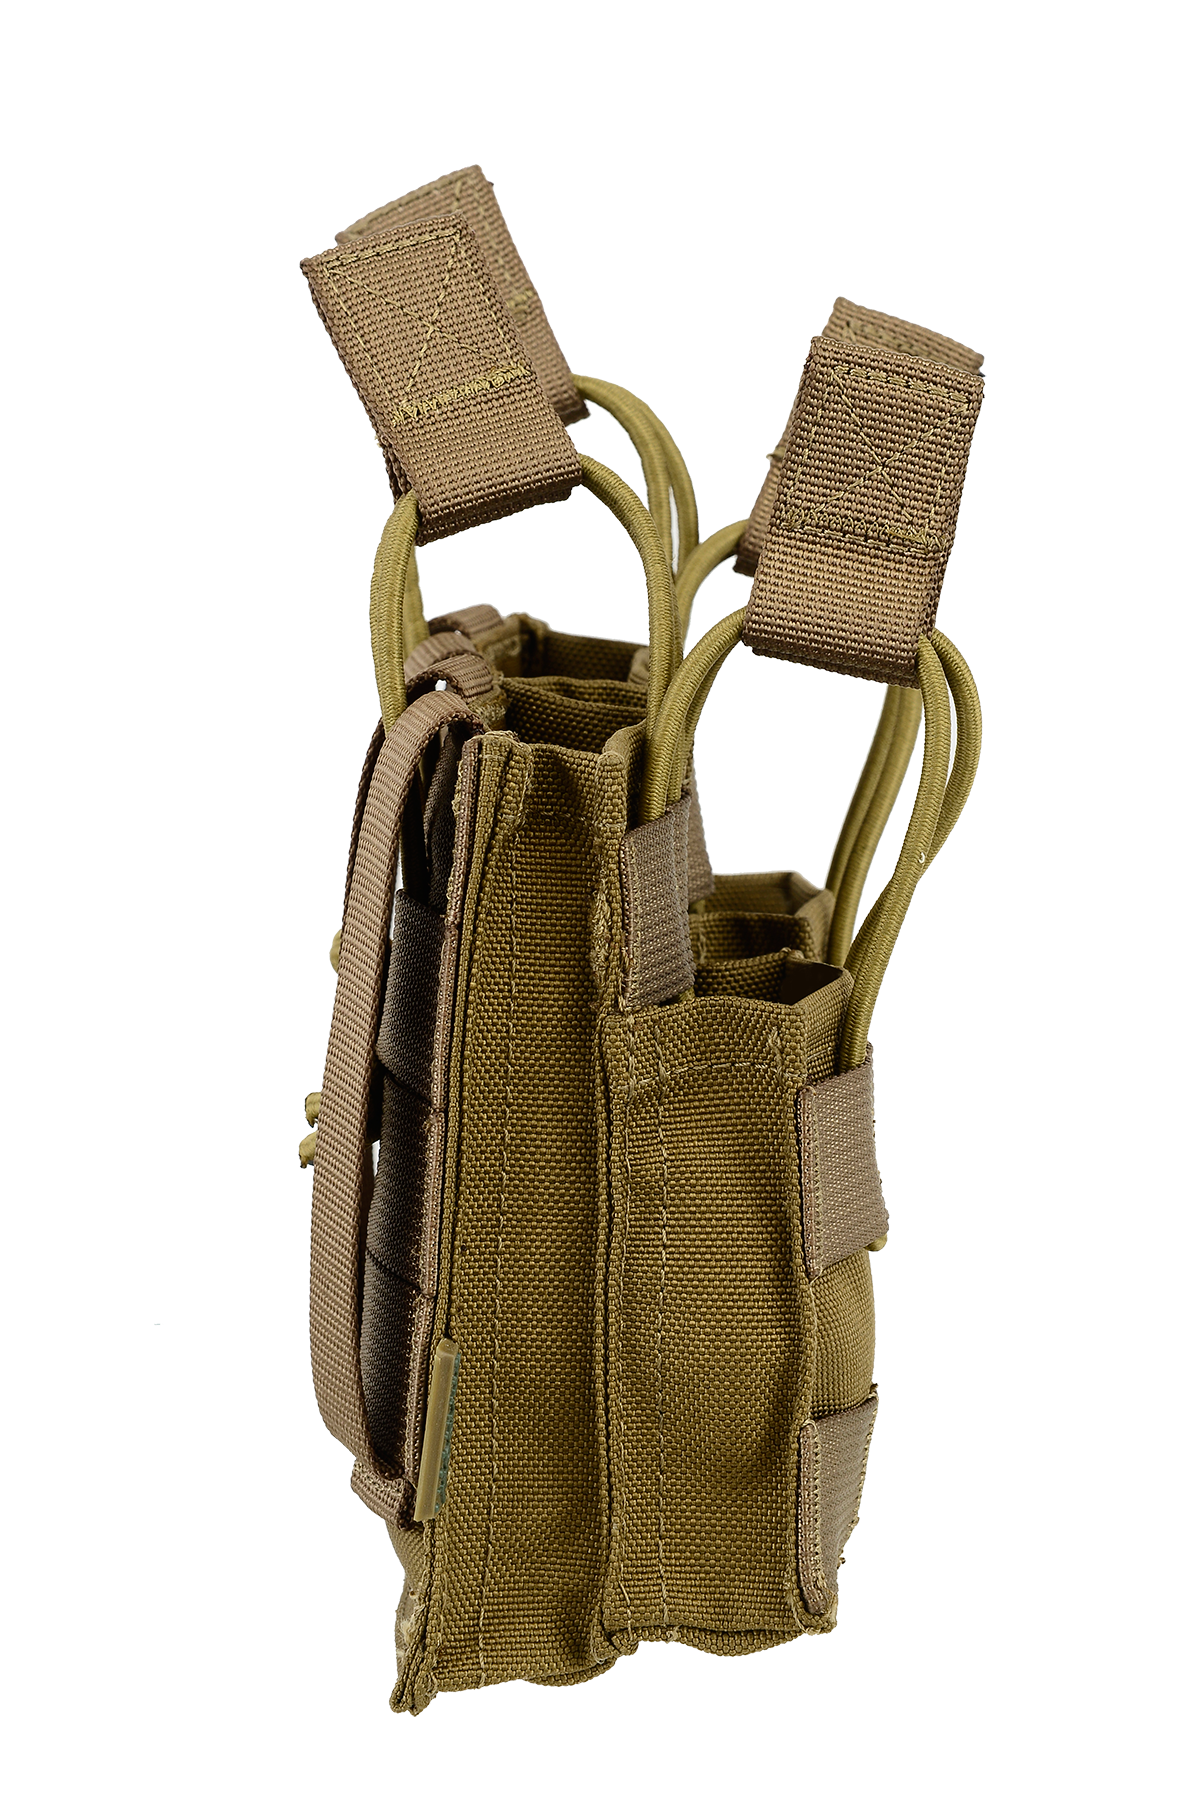 SHE-997 STACKER OPEN-TOP MAG POUCH DOUBLE